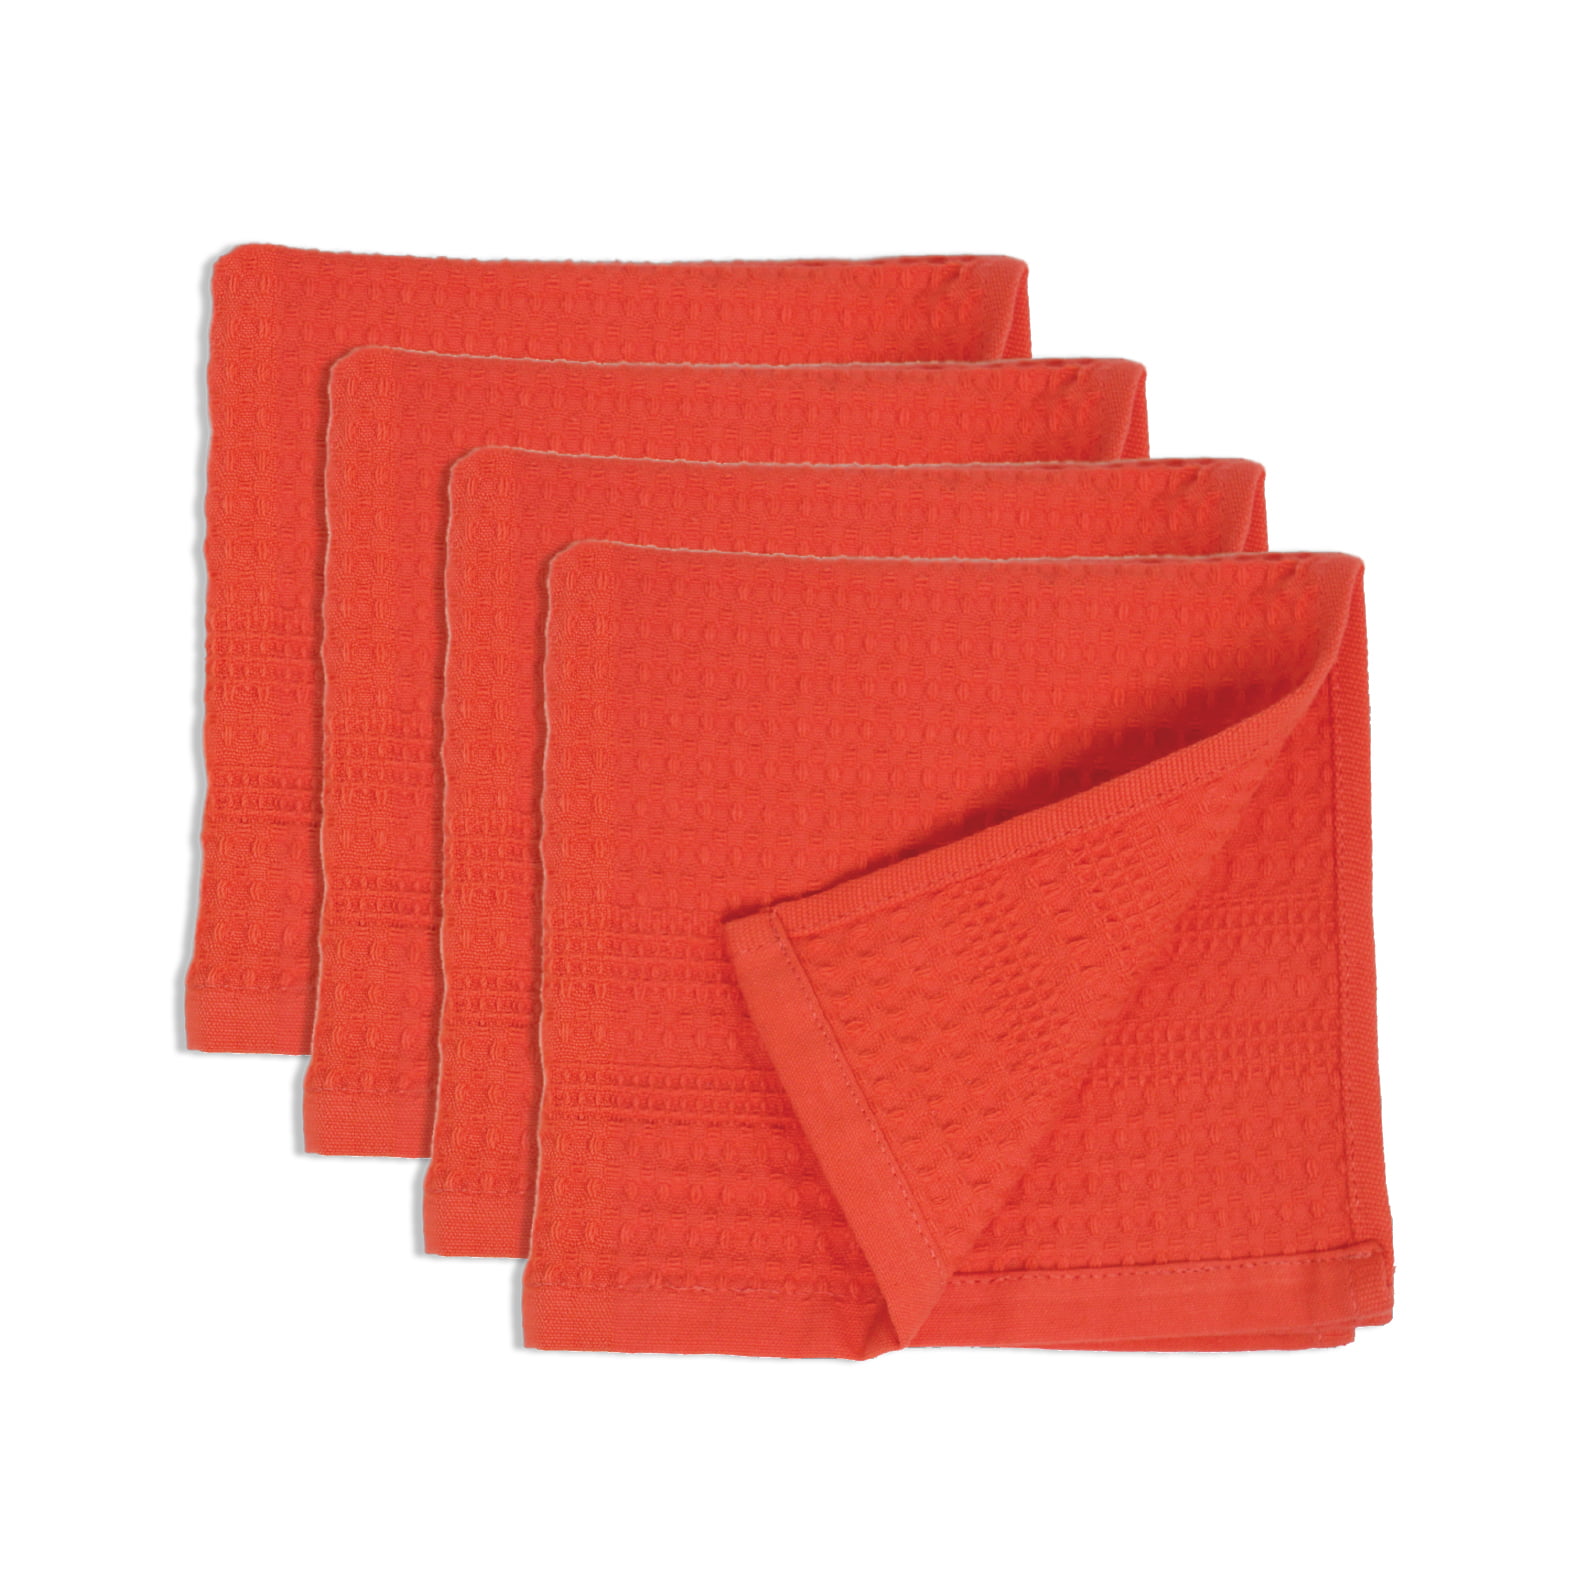 Gilden Tree Premium Washcloth 100% Natural Cotton Quick Dry Waffle Weave Soft Luxurious Highly Absorbent Fabric Small Face Towel No Lint Fade Resistant Color Coral